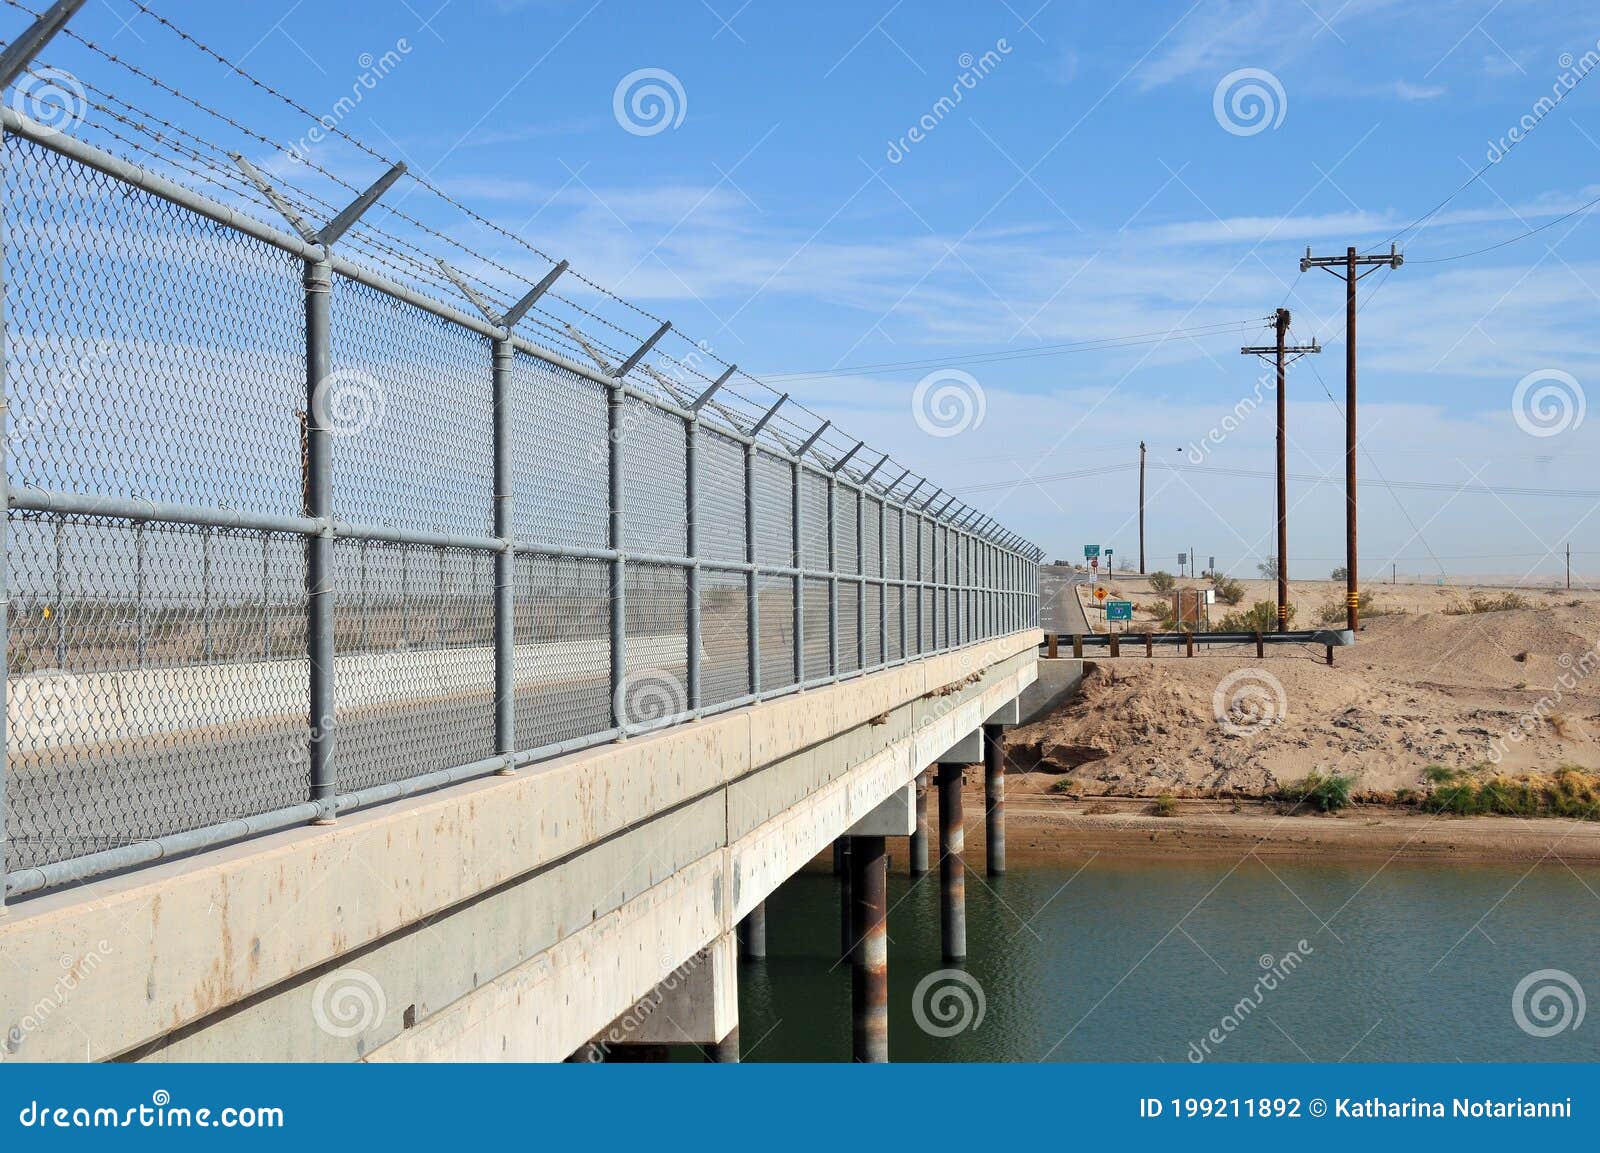 border canal between united states and mexico